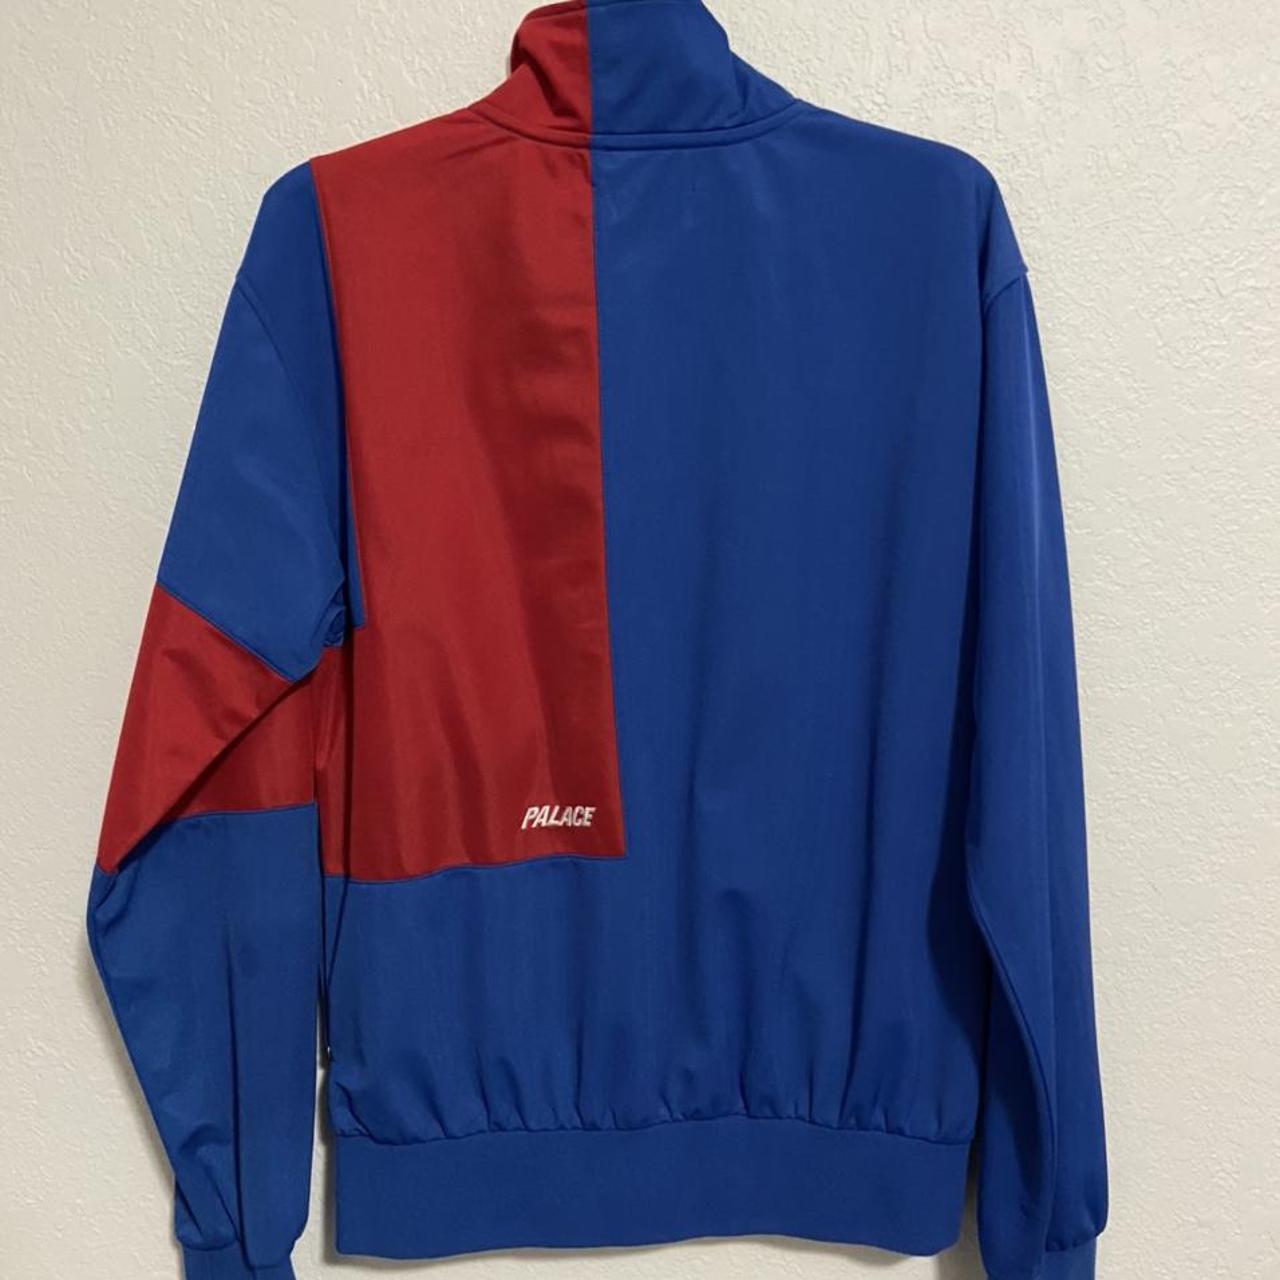 PALACE TRACK SUIT BLUE RED ZIP UP #BAPEFORSALE...